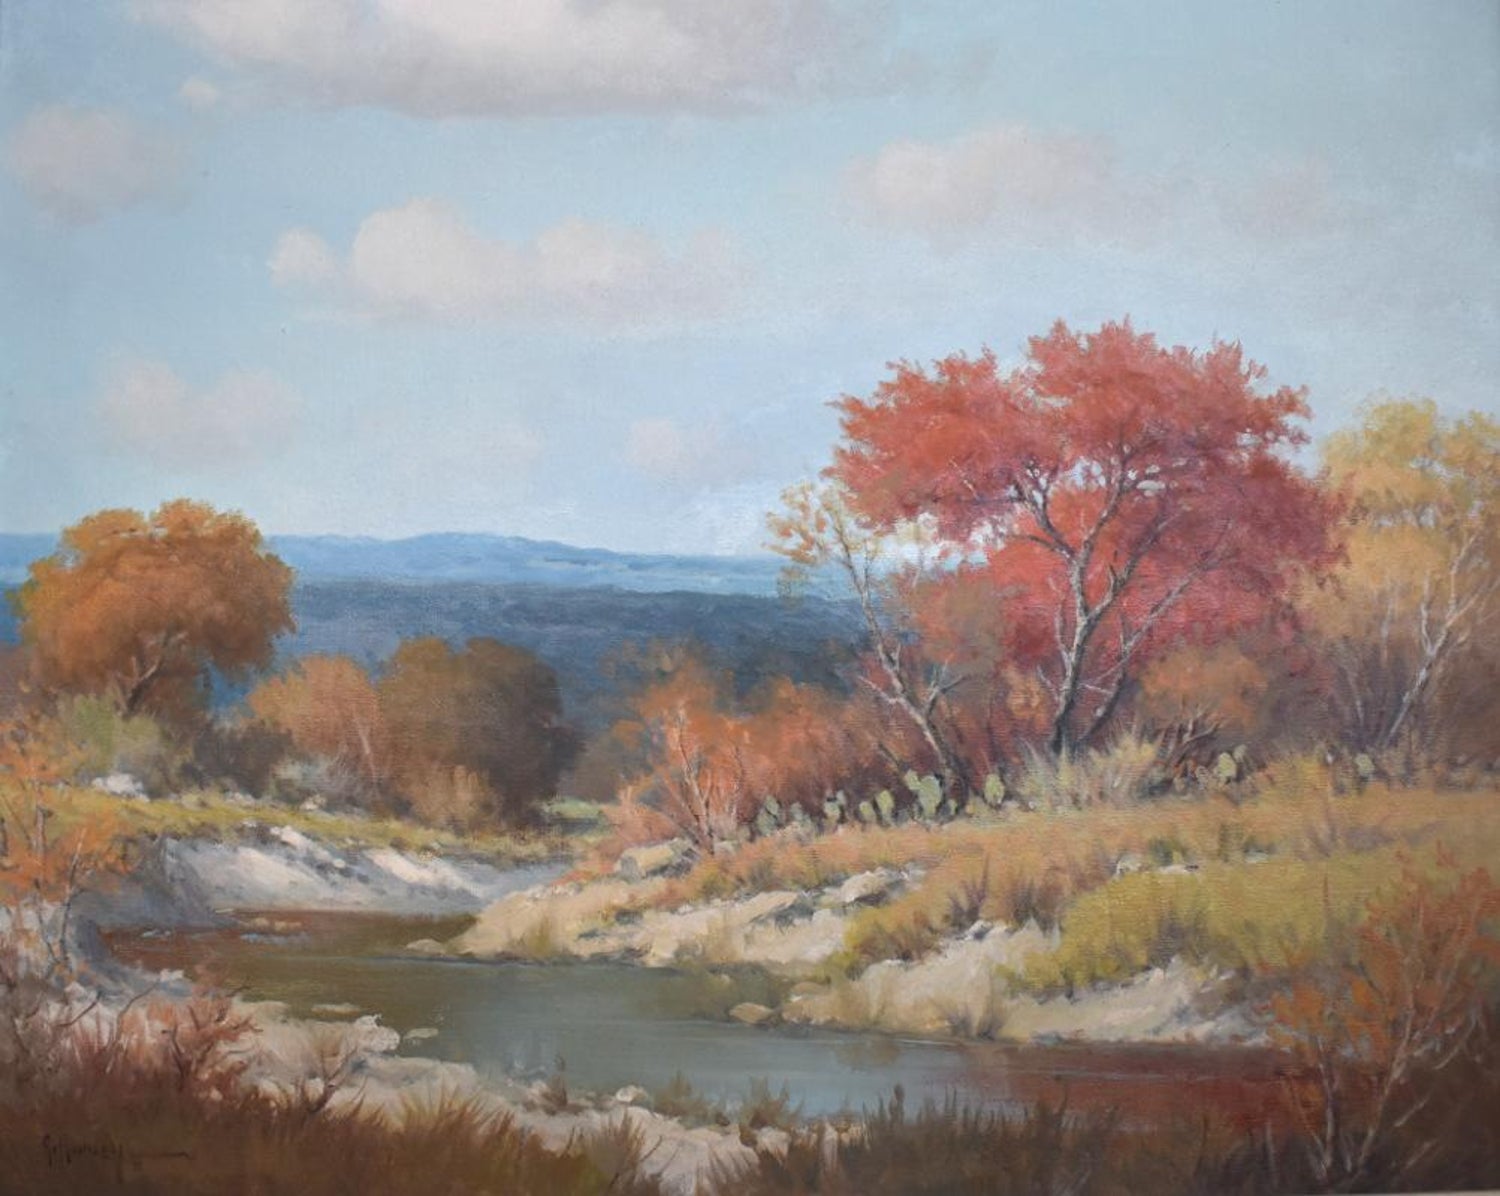 G. Harvey - "TEXAS HILL COUNTRY RIVER" at 1stDibs